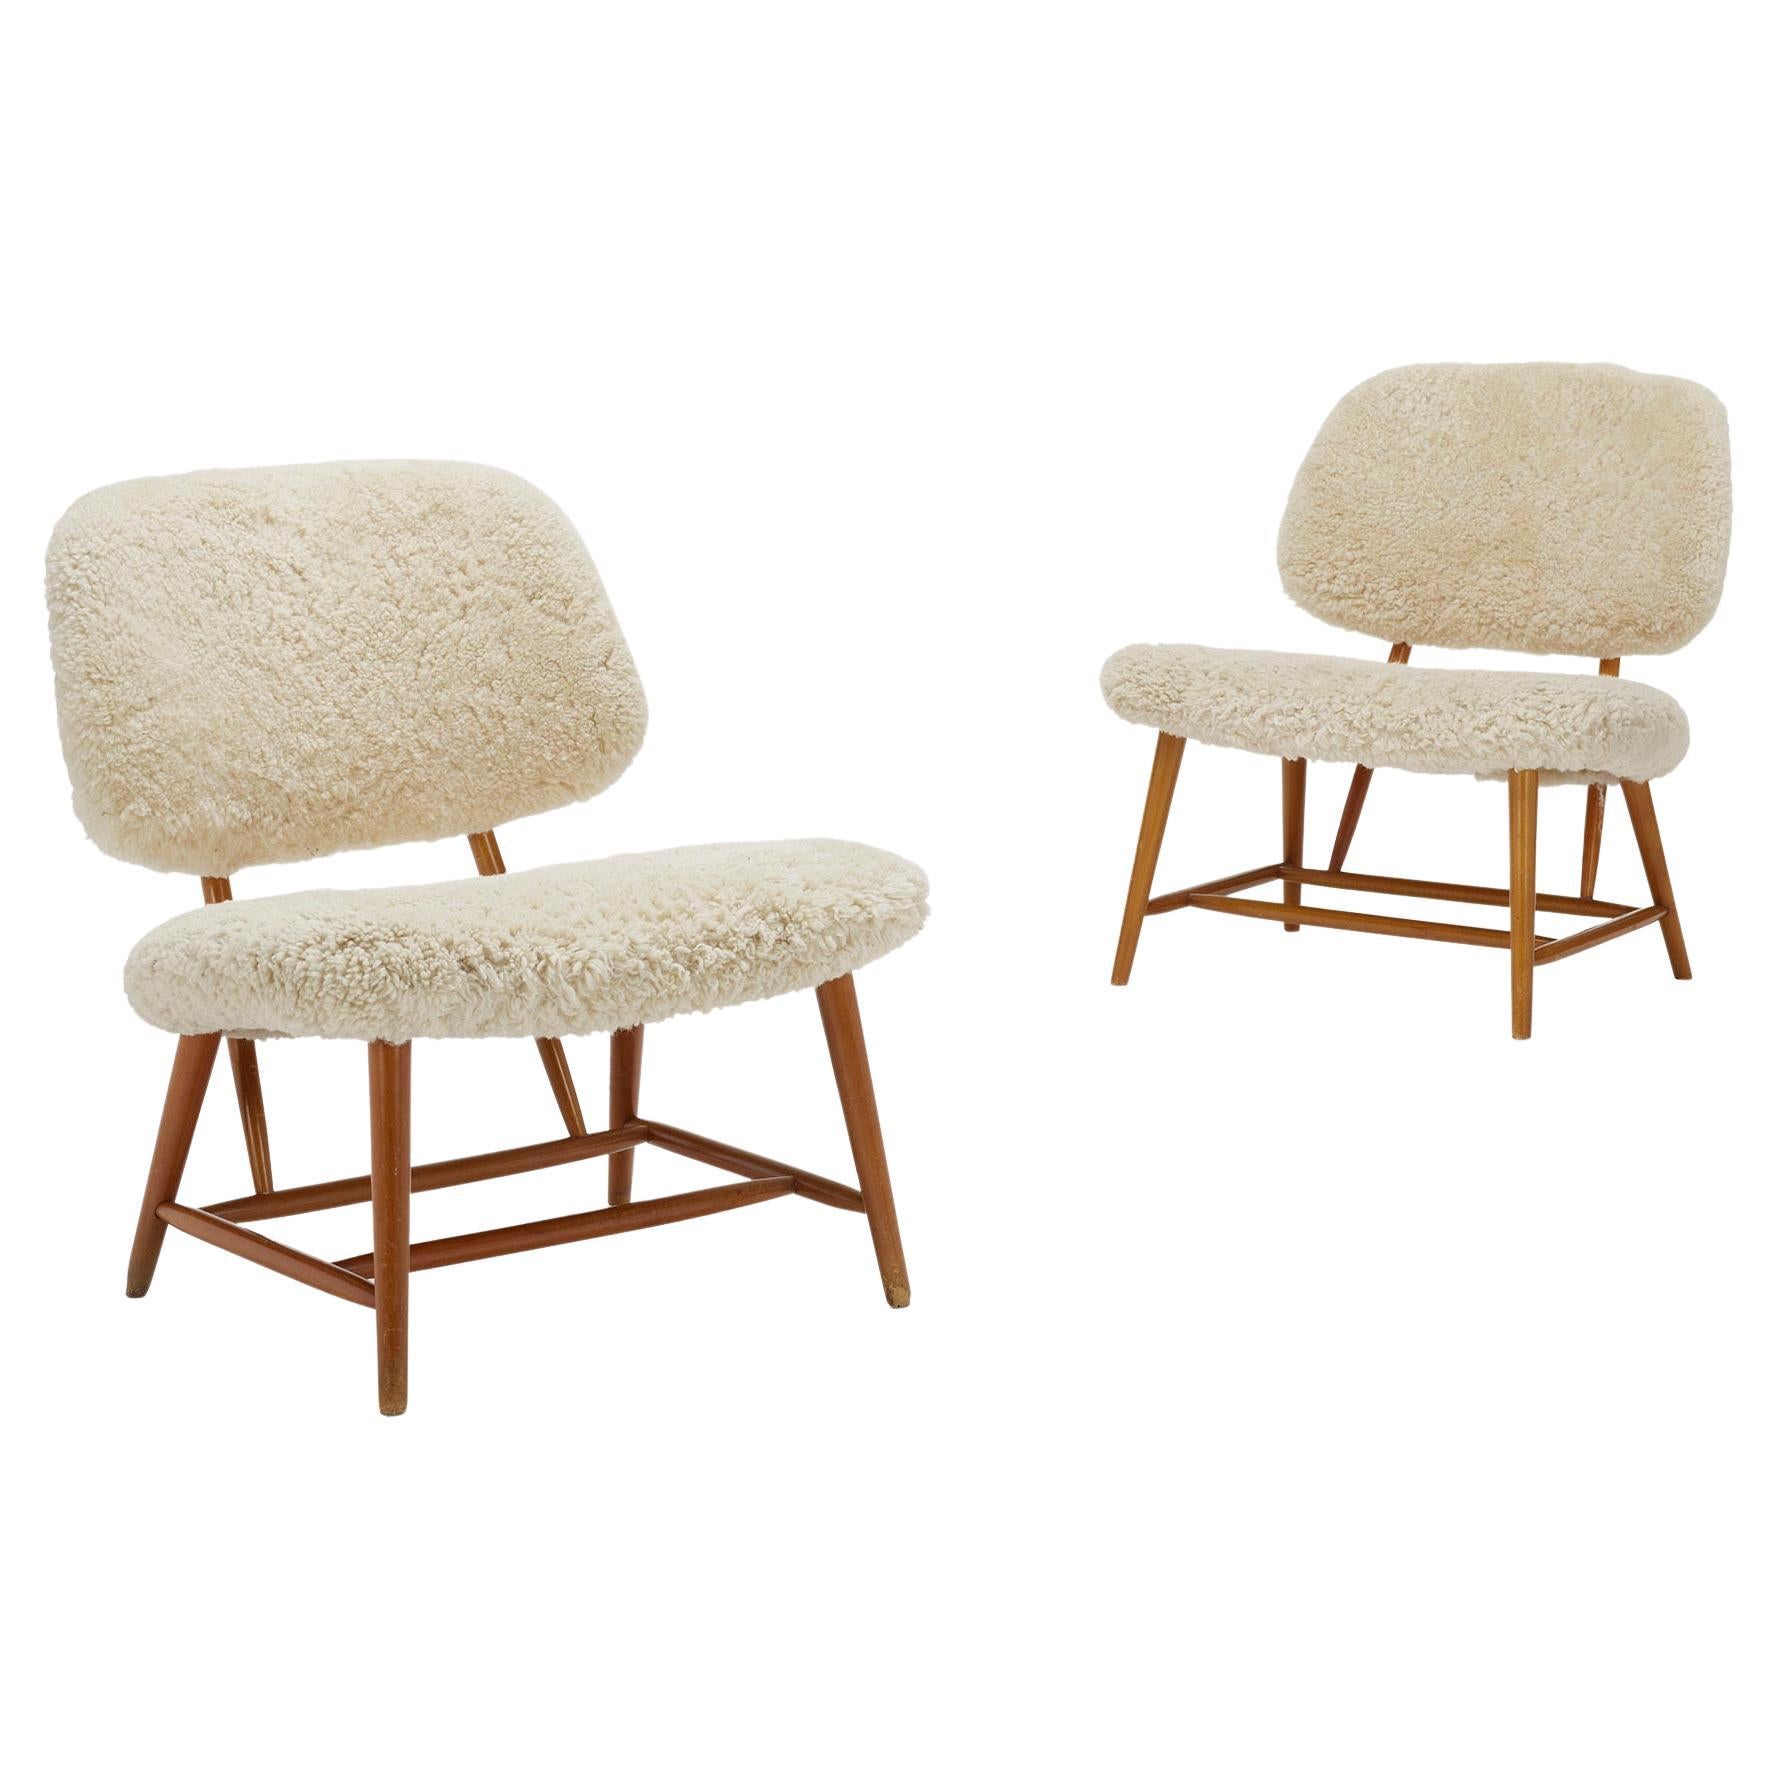 Pair of Teve Chairs by Alf Svensson